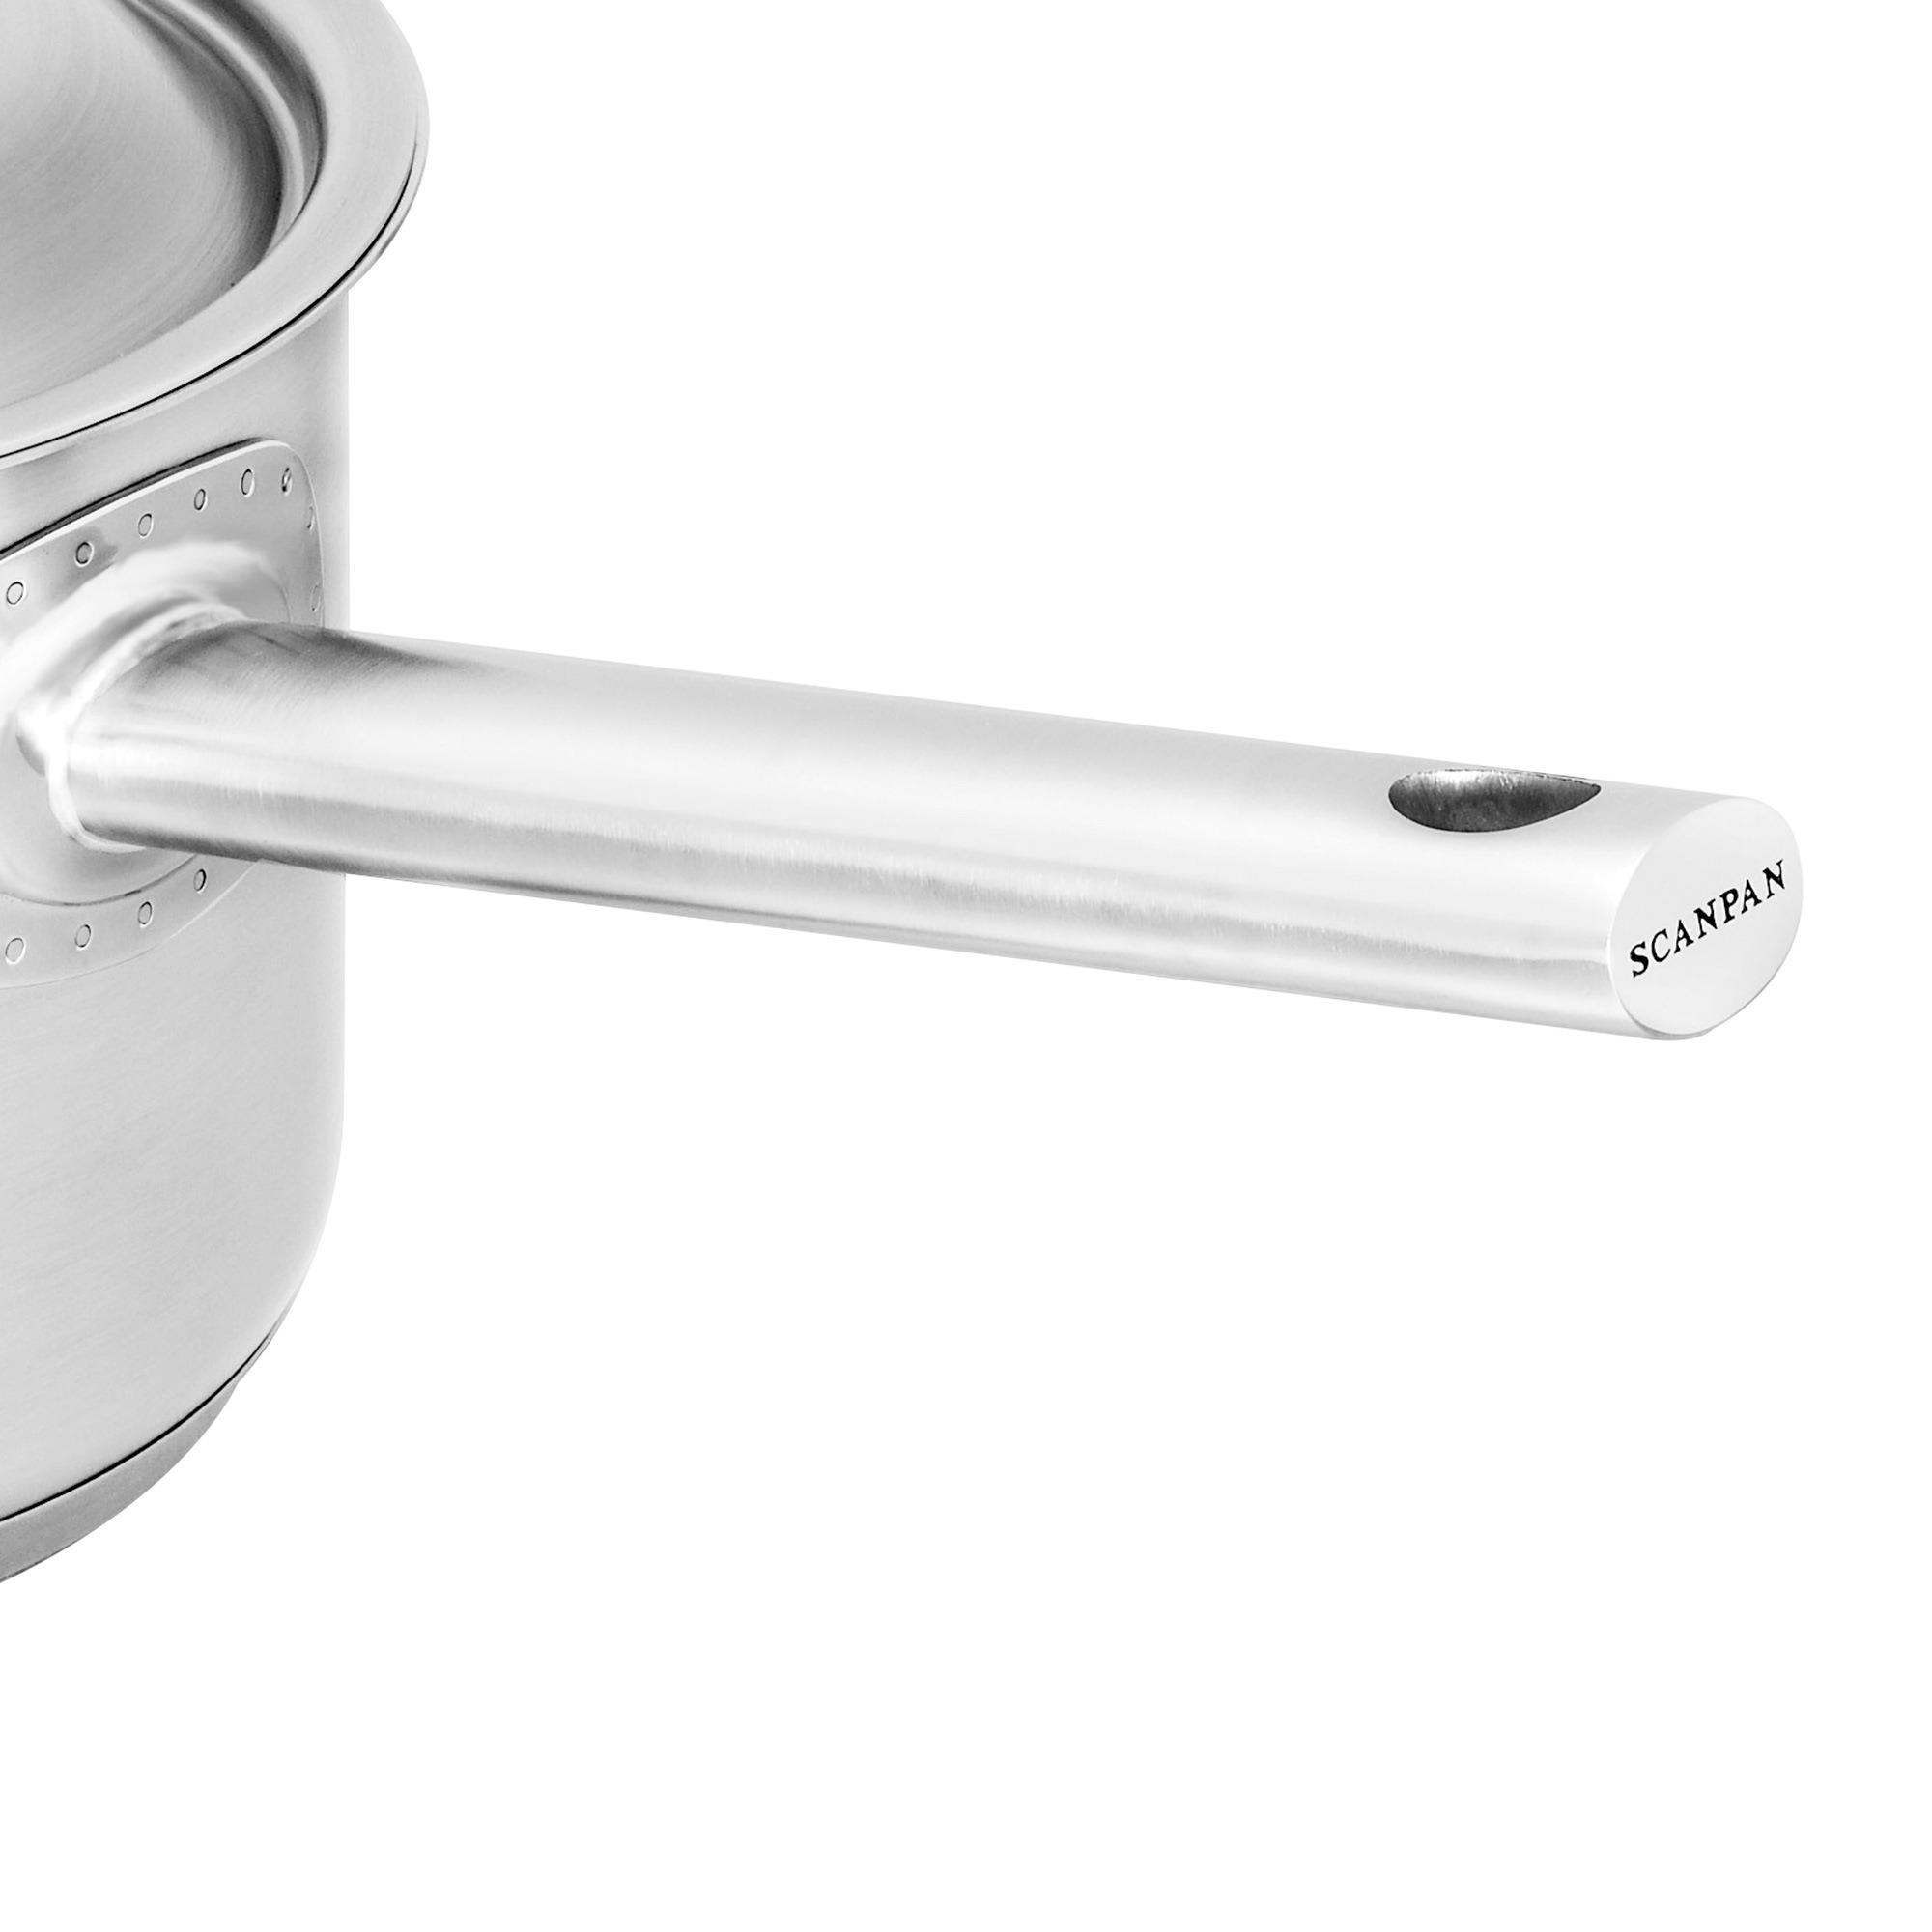 Scanpan Commercial Stainless Steel Covered Saucepan 18cm - 2.5L Image 4